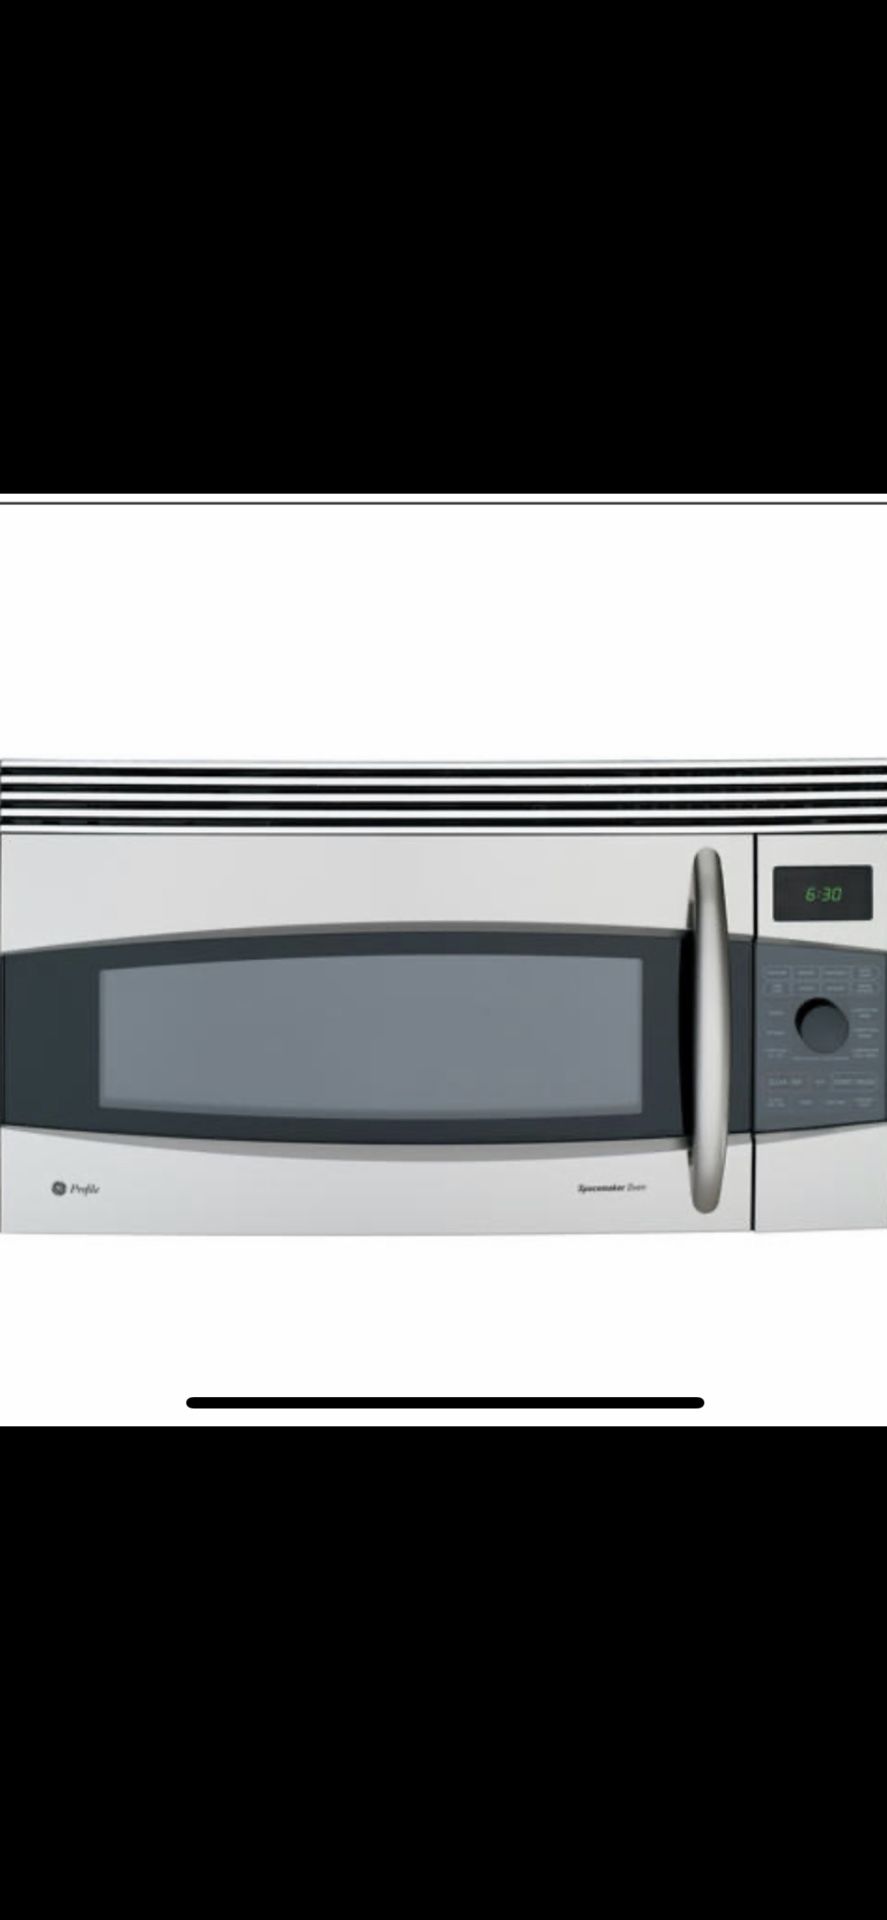 Profile microwave bought for 800 selling for 60 bucks